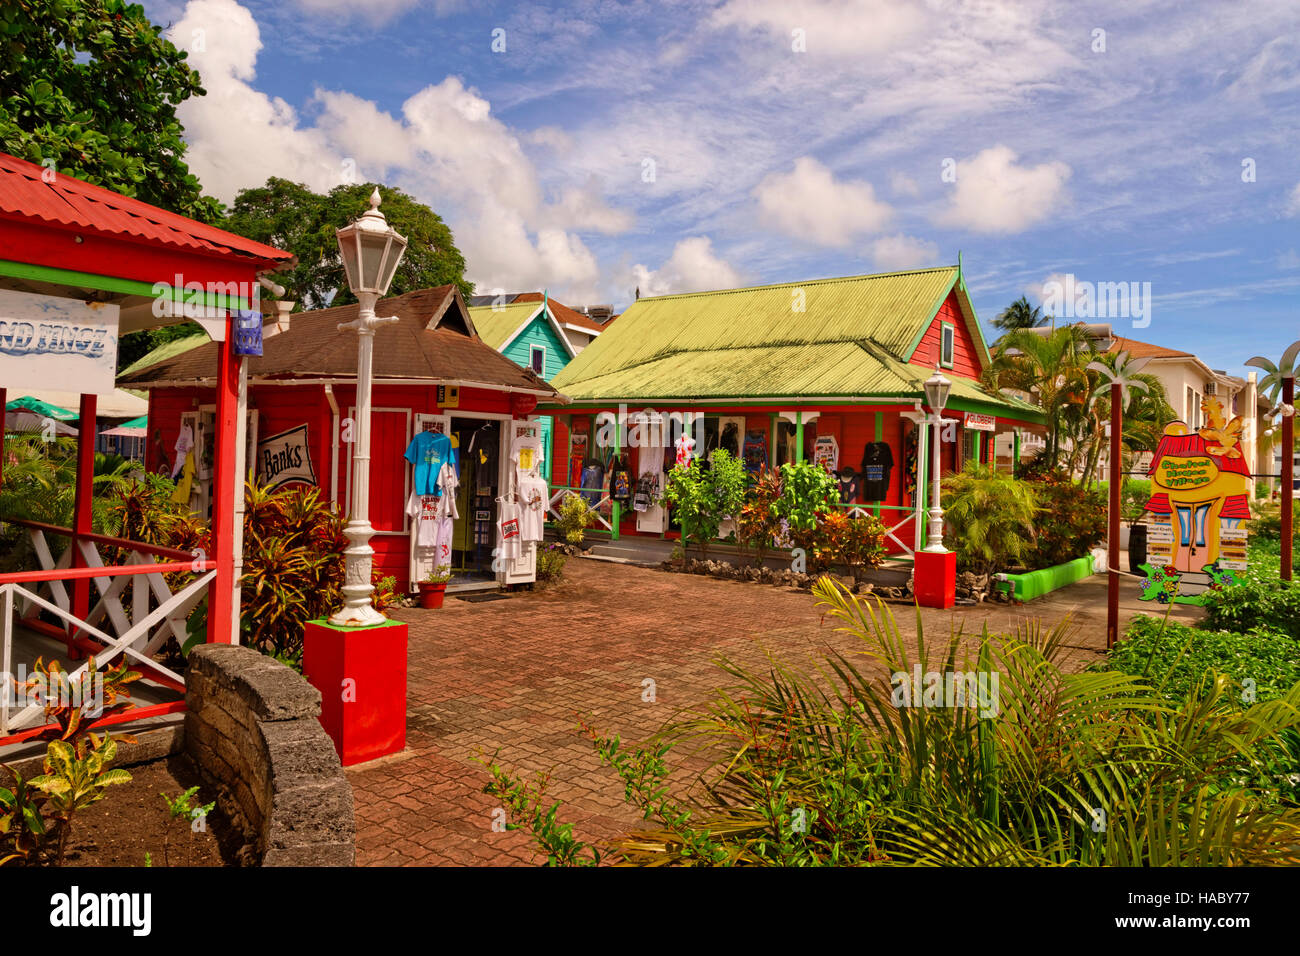 Colonial bungalow Boutique style shops at Dover, St. Lawrence Gap, Barbados, Caribbean. Stock Photo